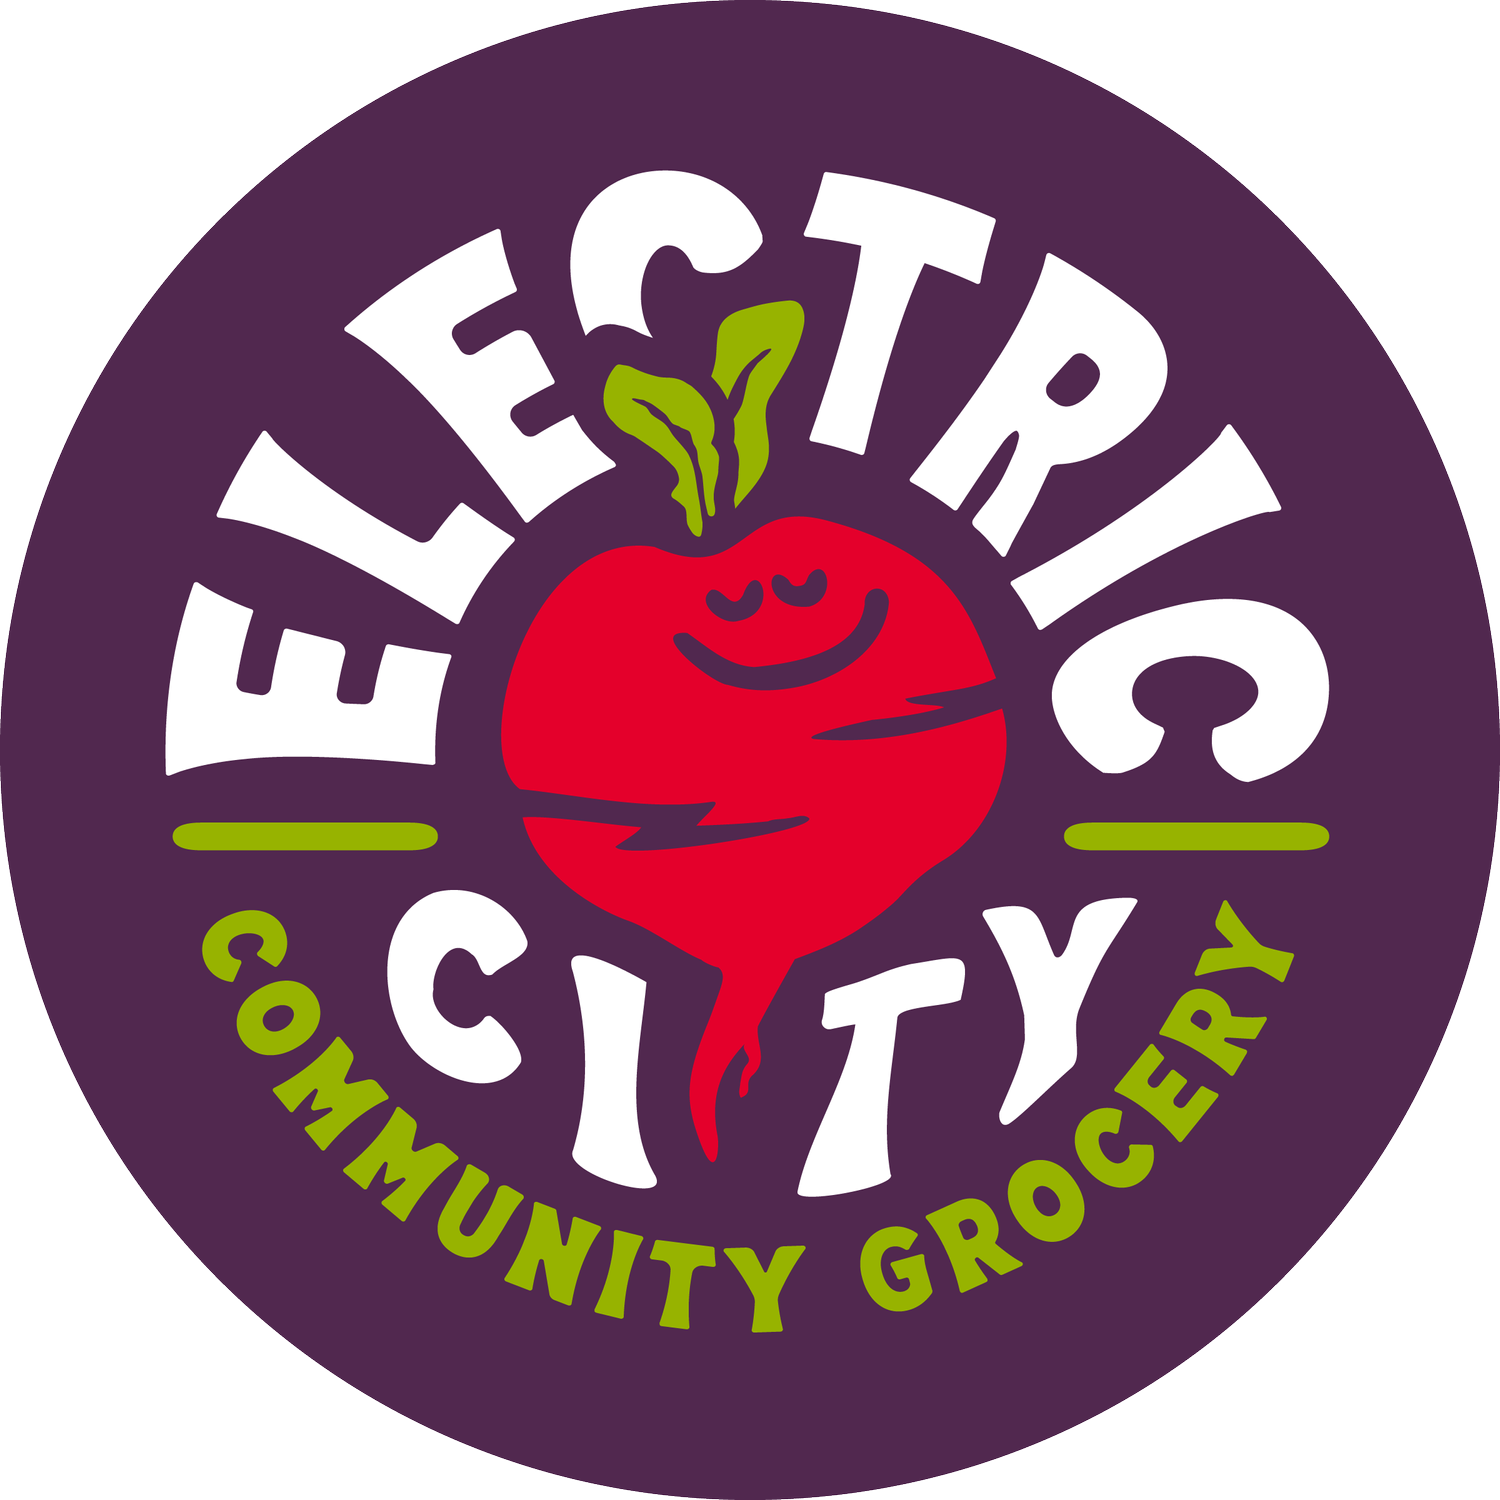 Electric City Community Grocery